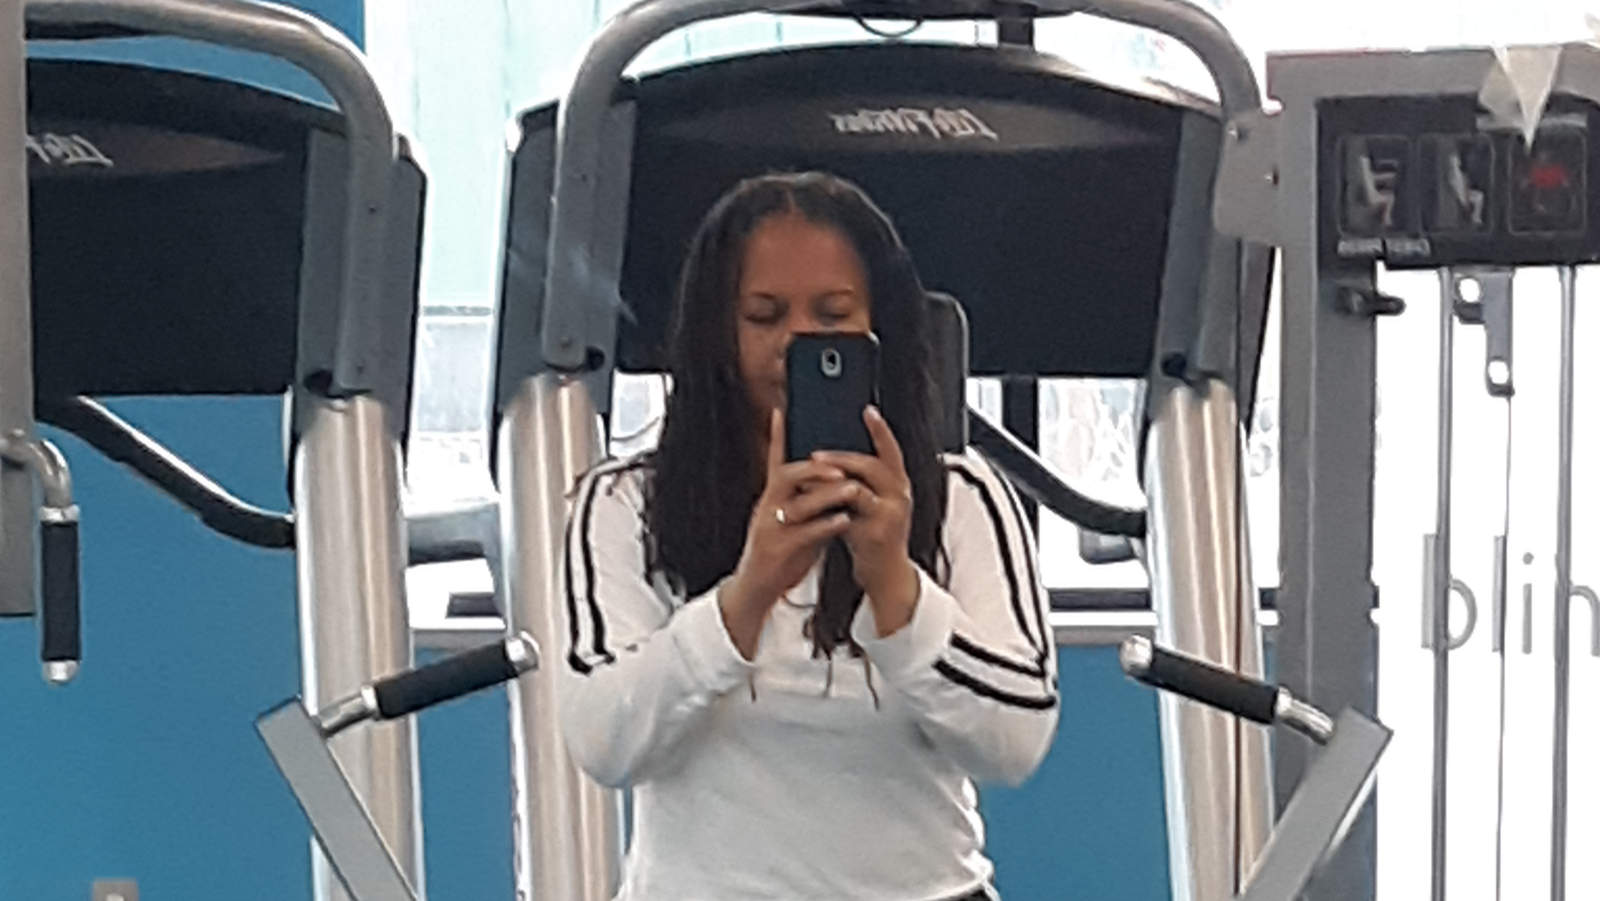 Braidlocs in the gym Mireille Liong